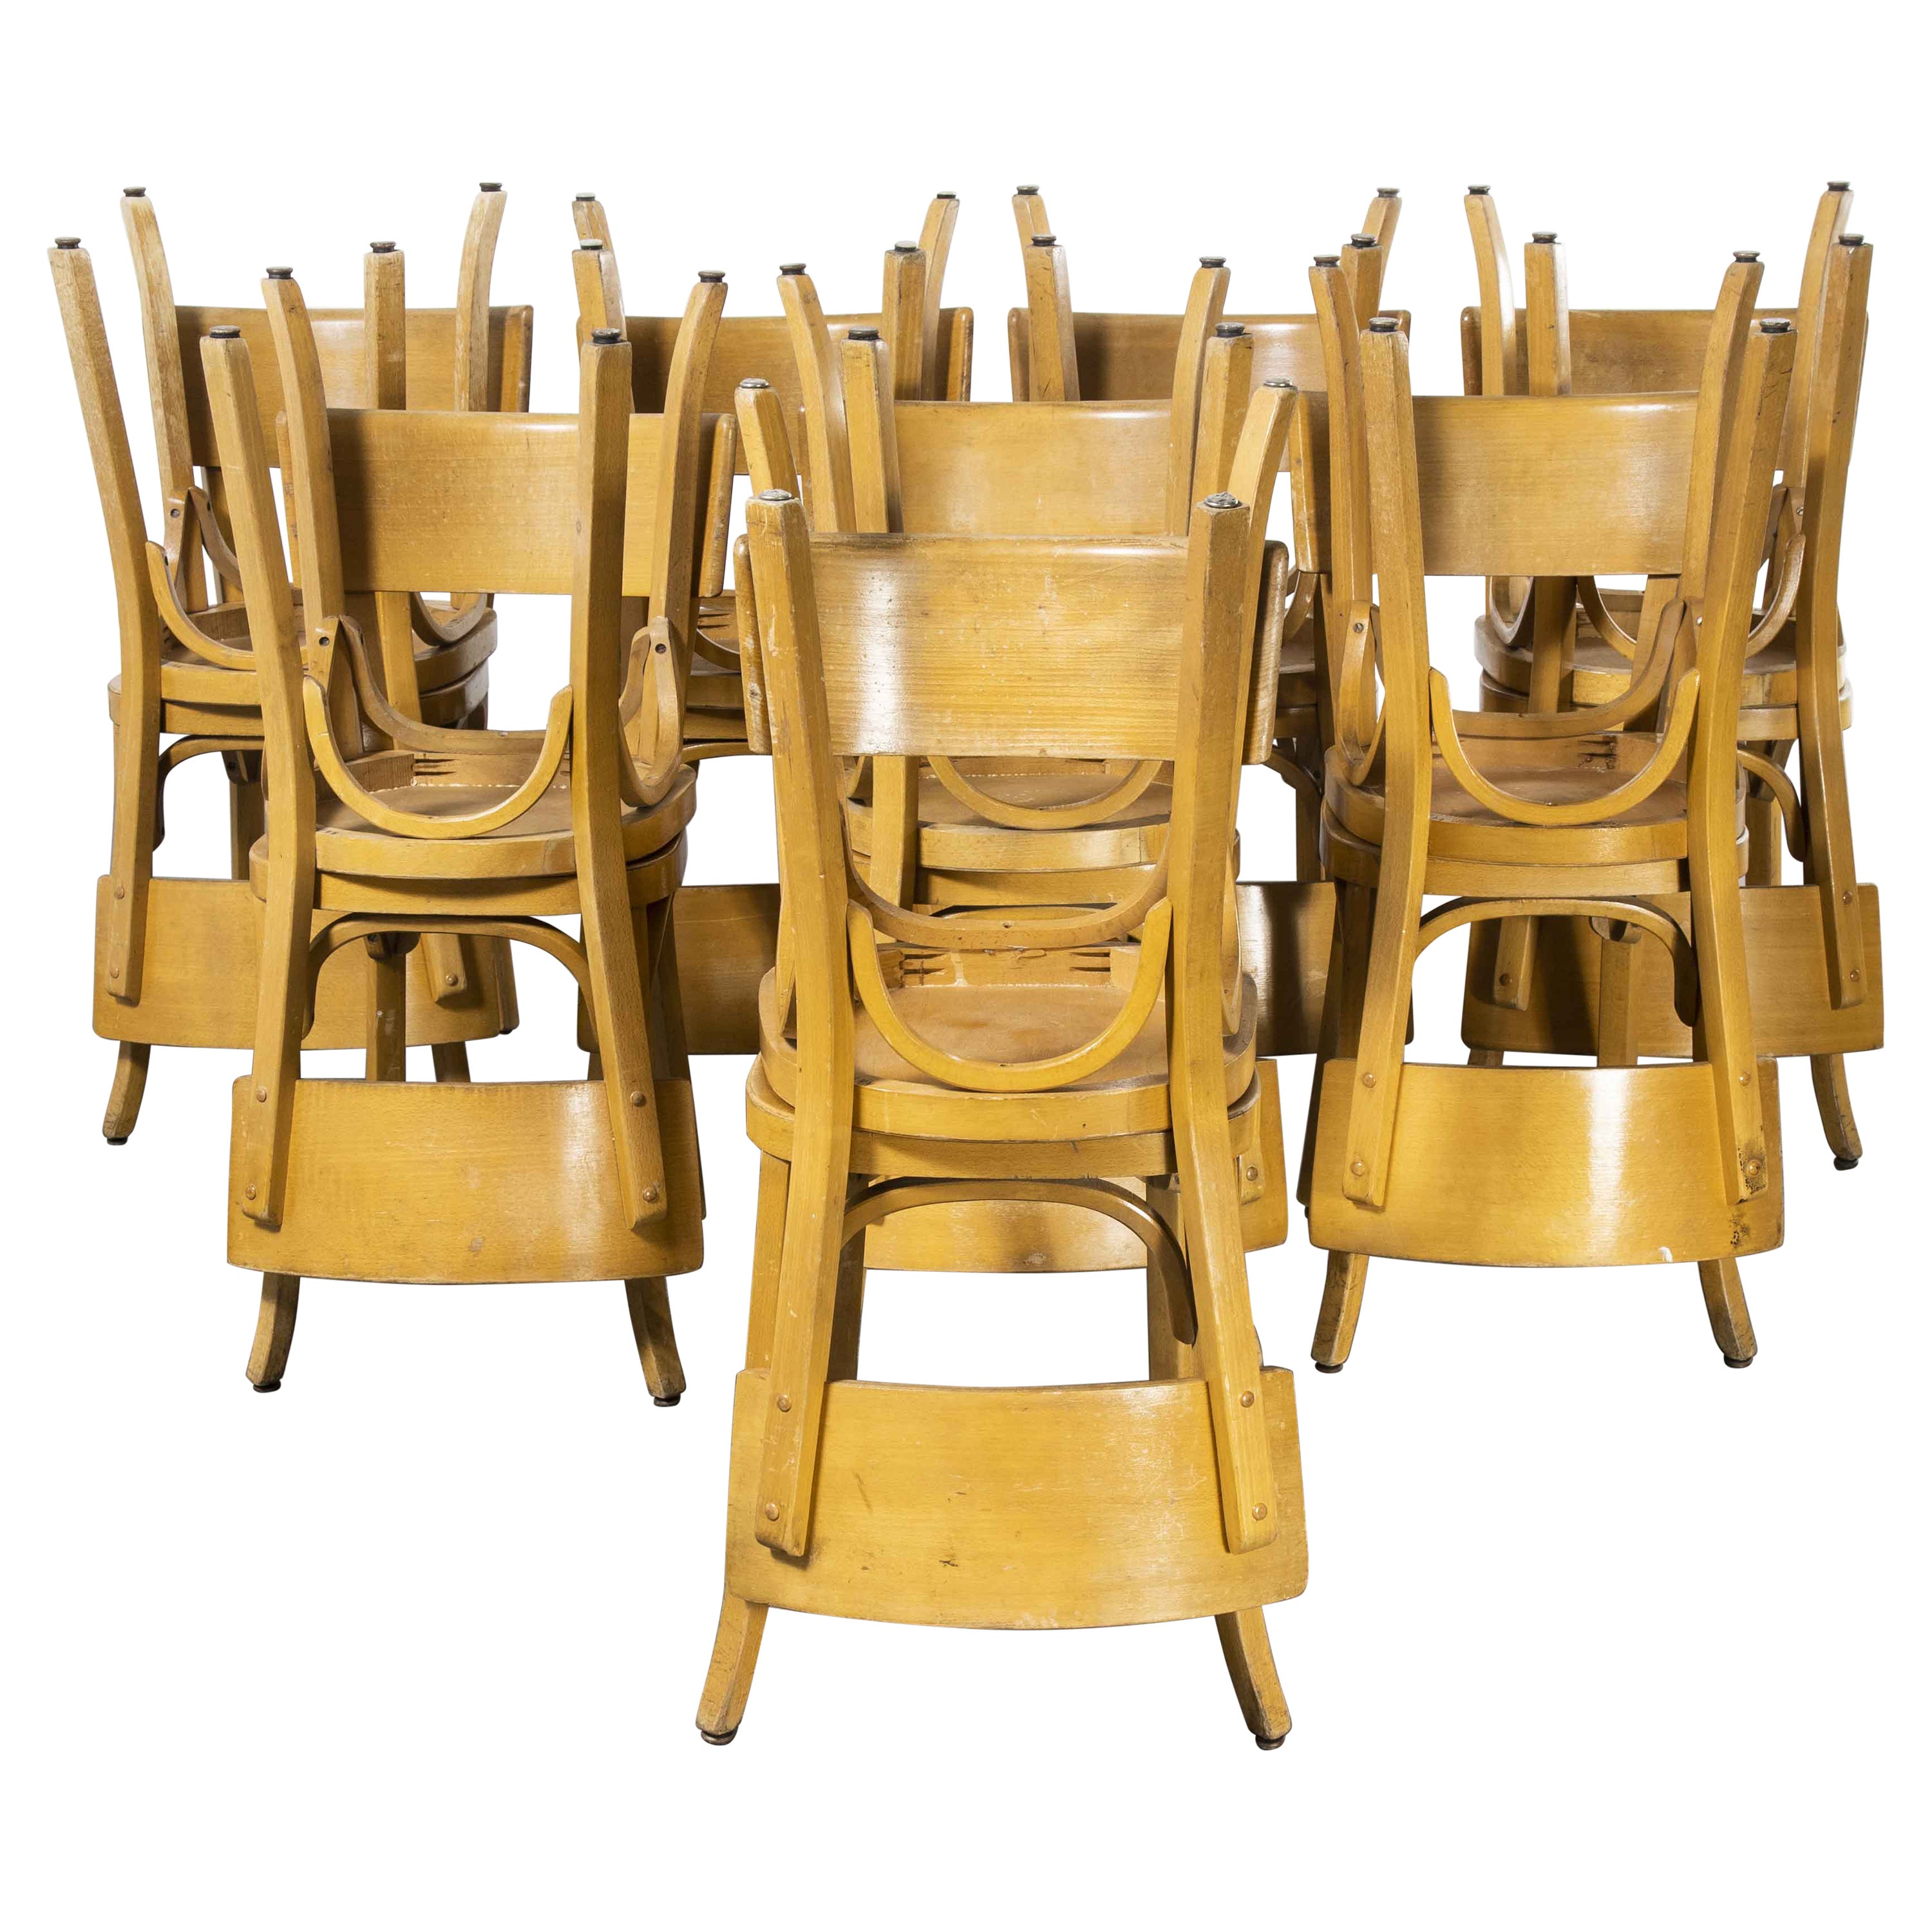 1950's French Baumann Blonde Beech Bentwood Dining Chairs, Various Qty Available